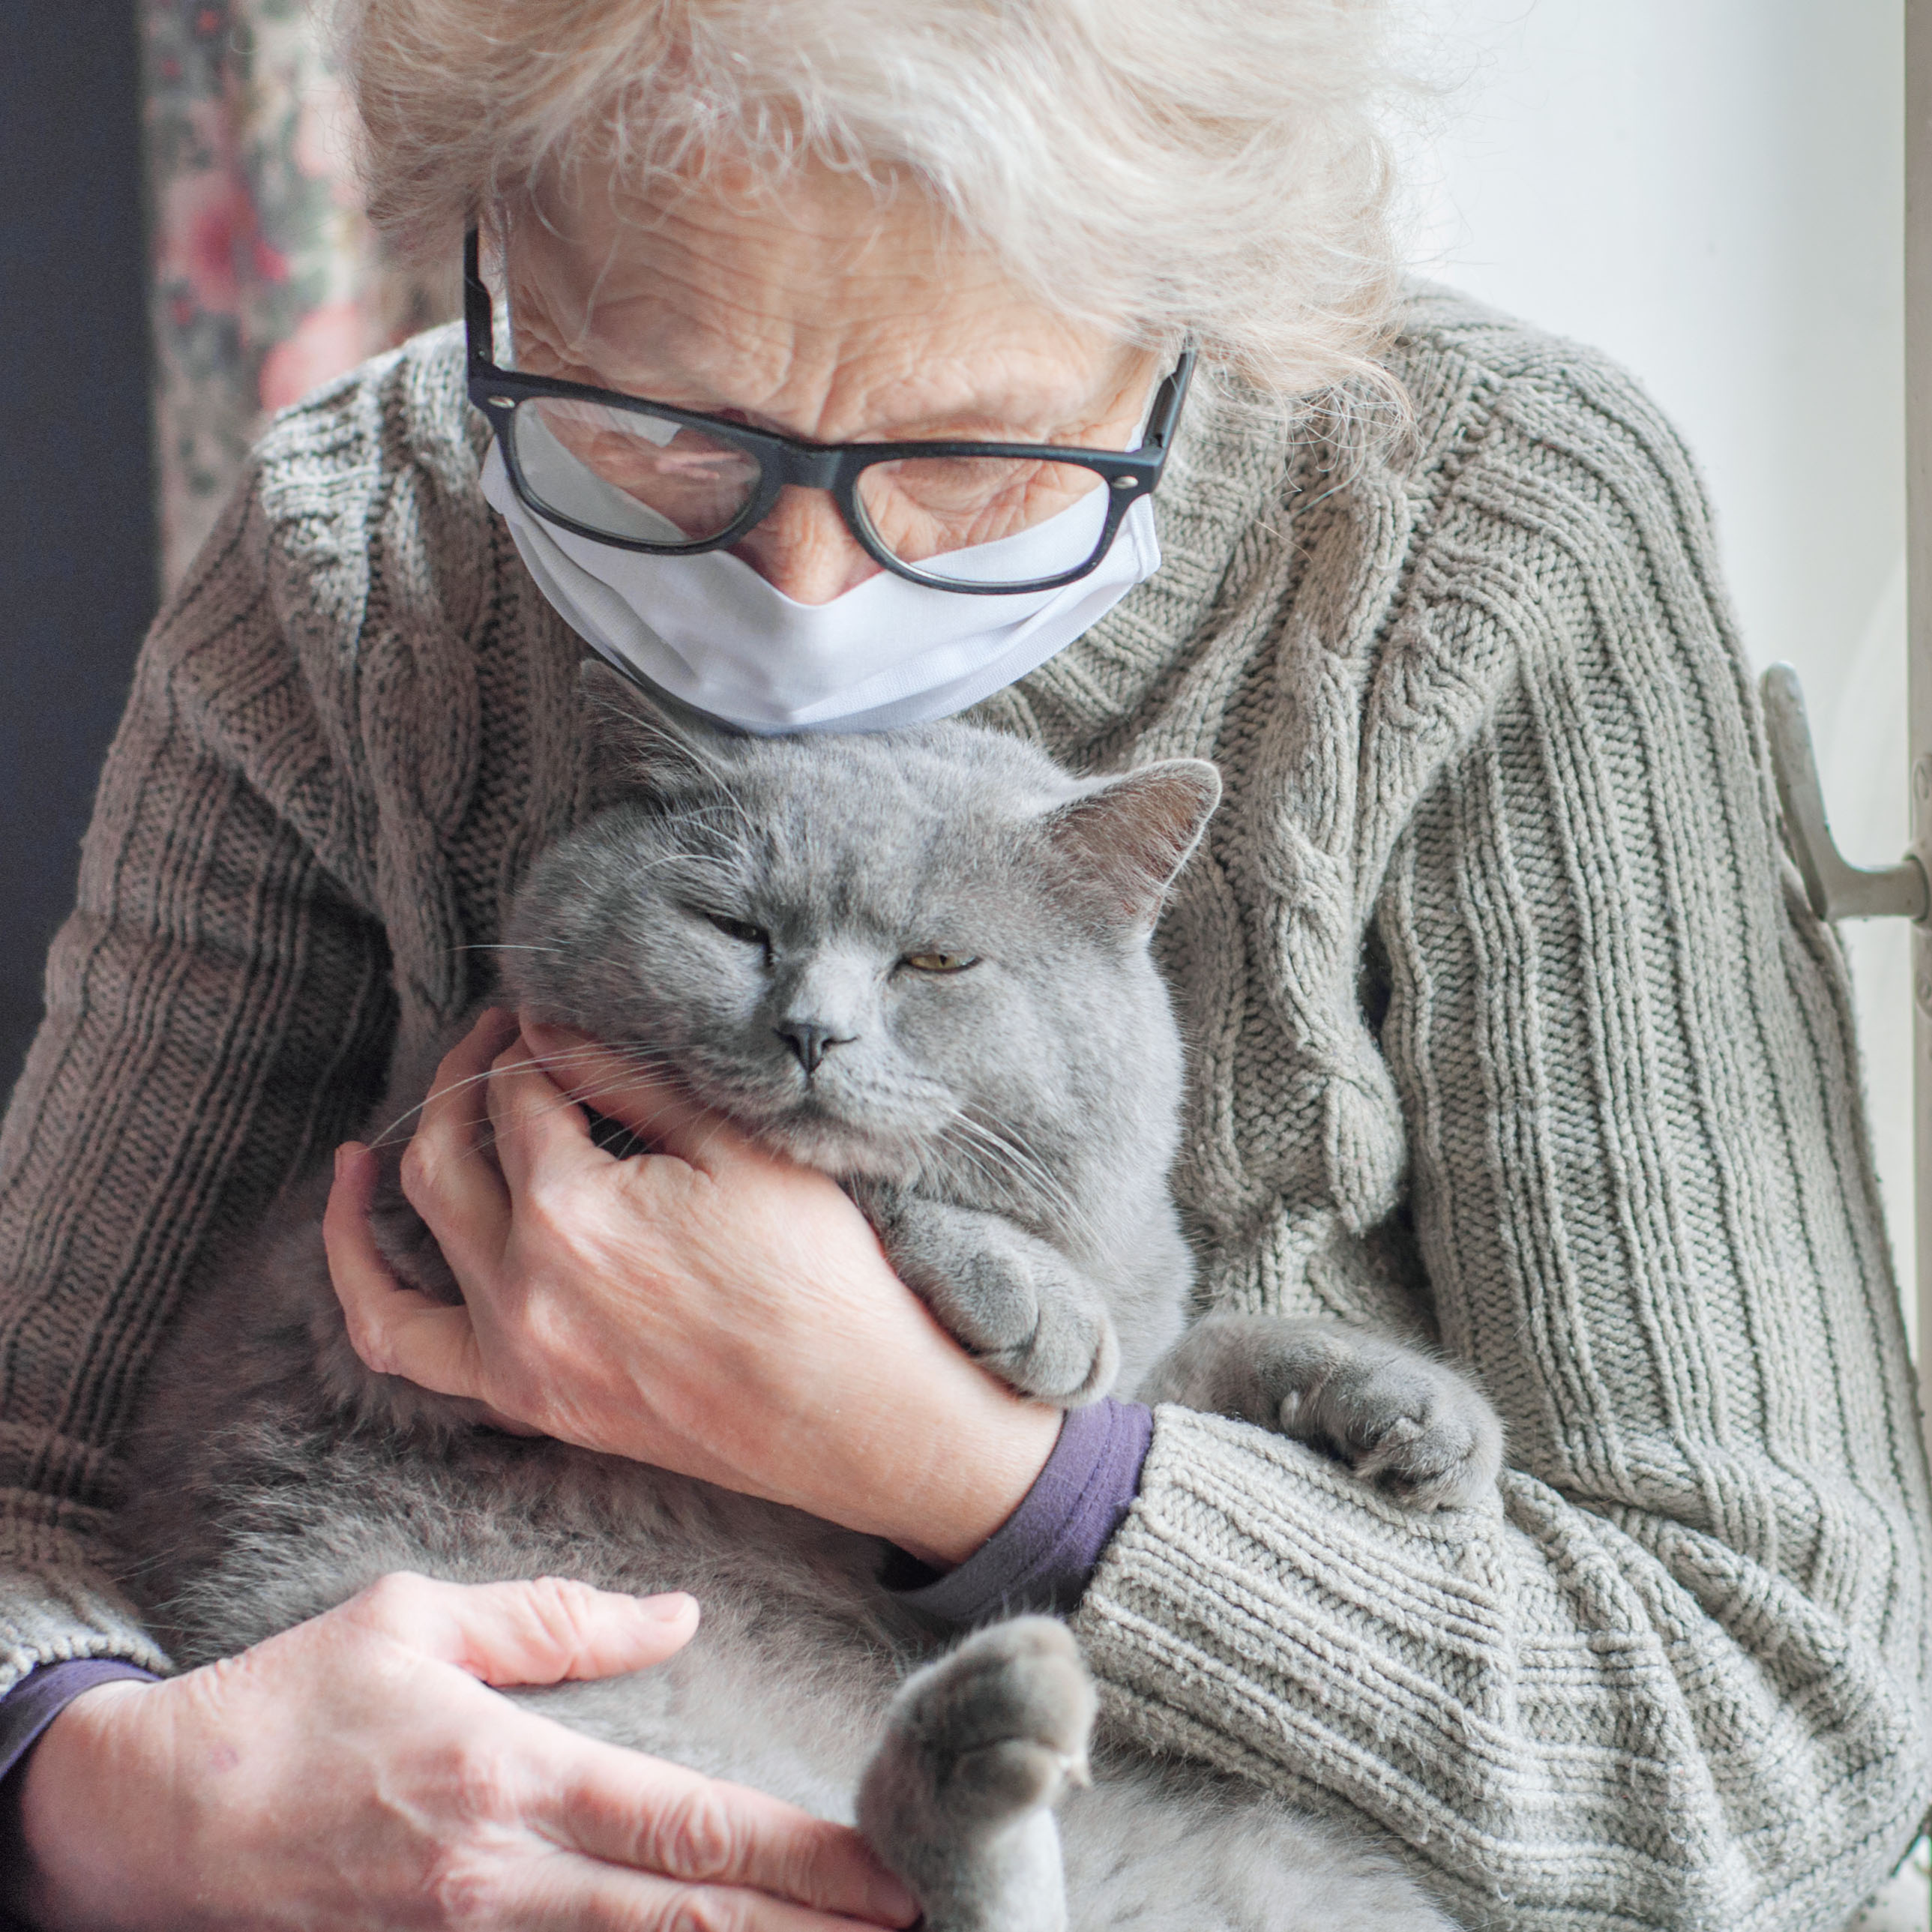 Pets create 'pawsitive' change for people in aged care - News and events -  University of South Australia